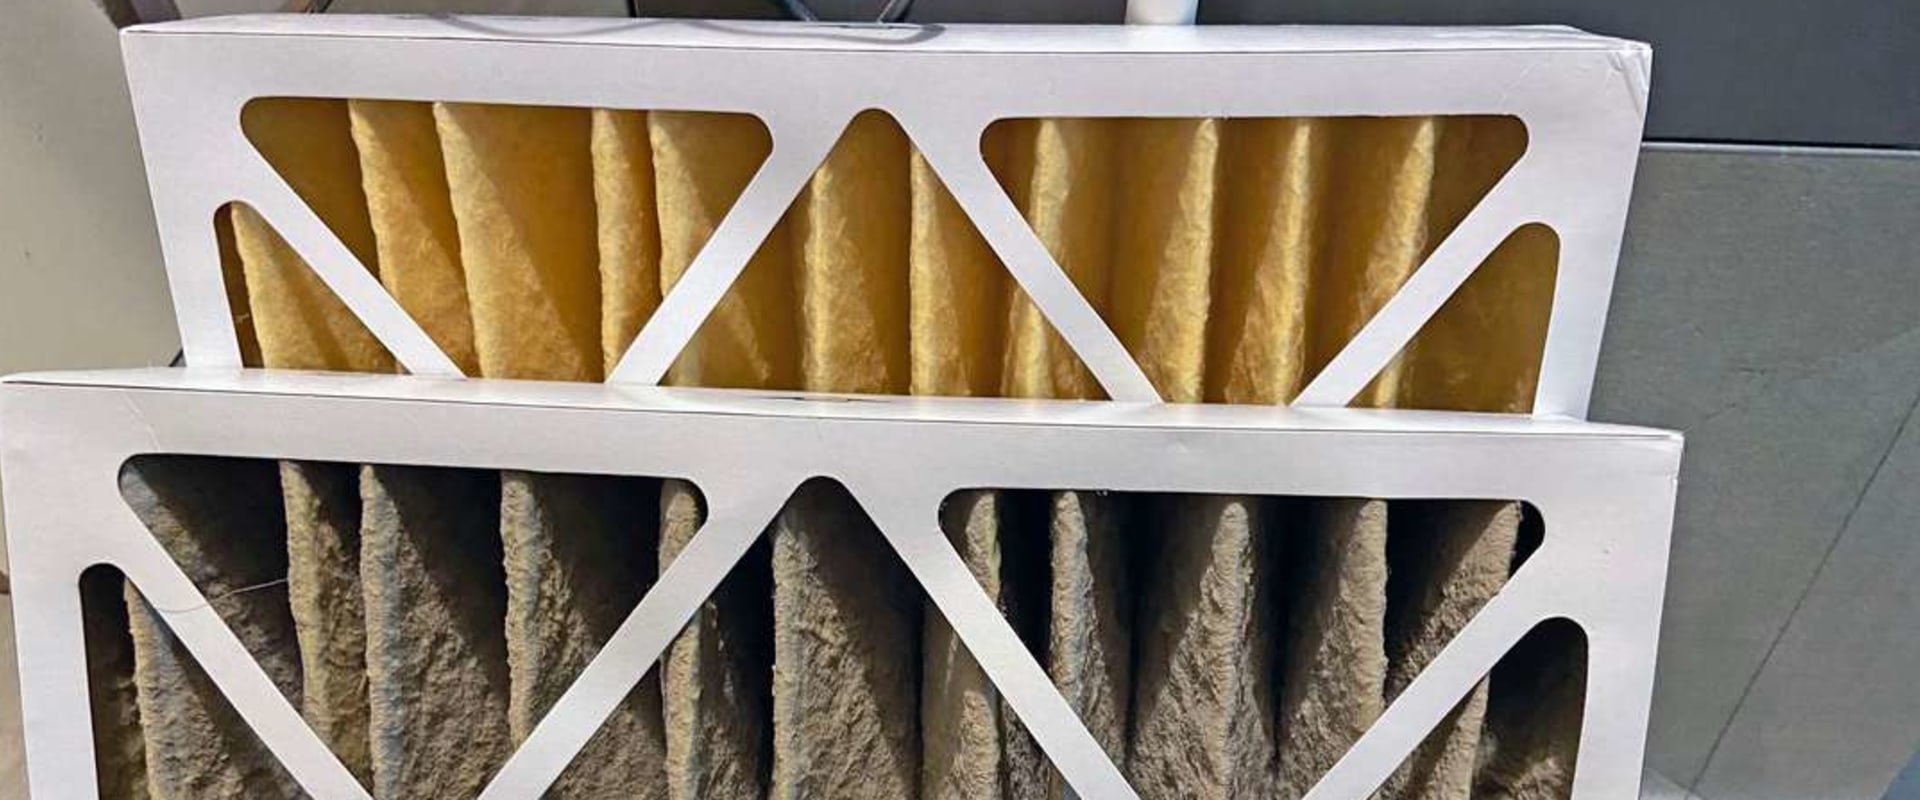 What happens if you put the wrong size air filter?